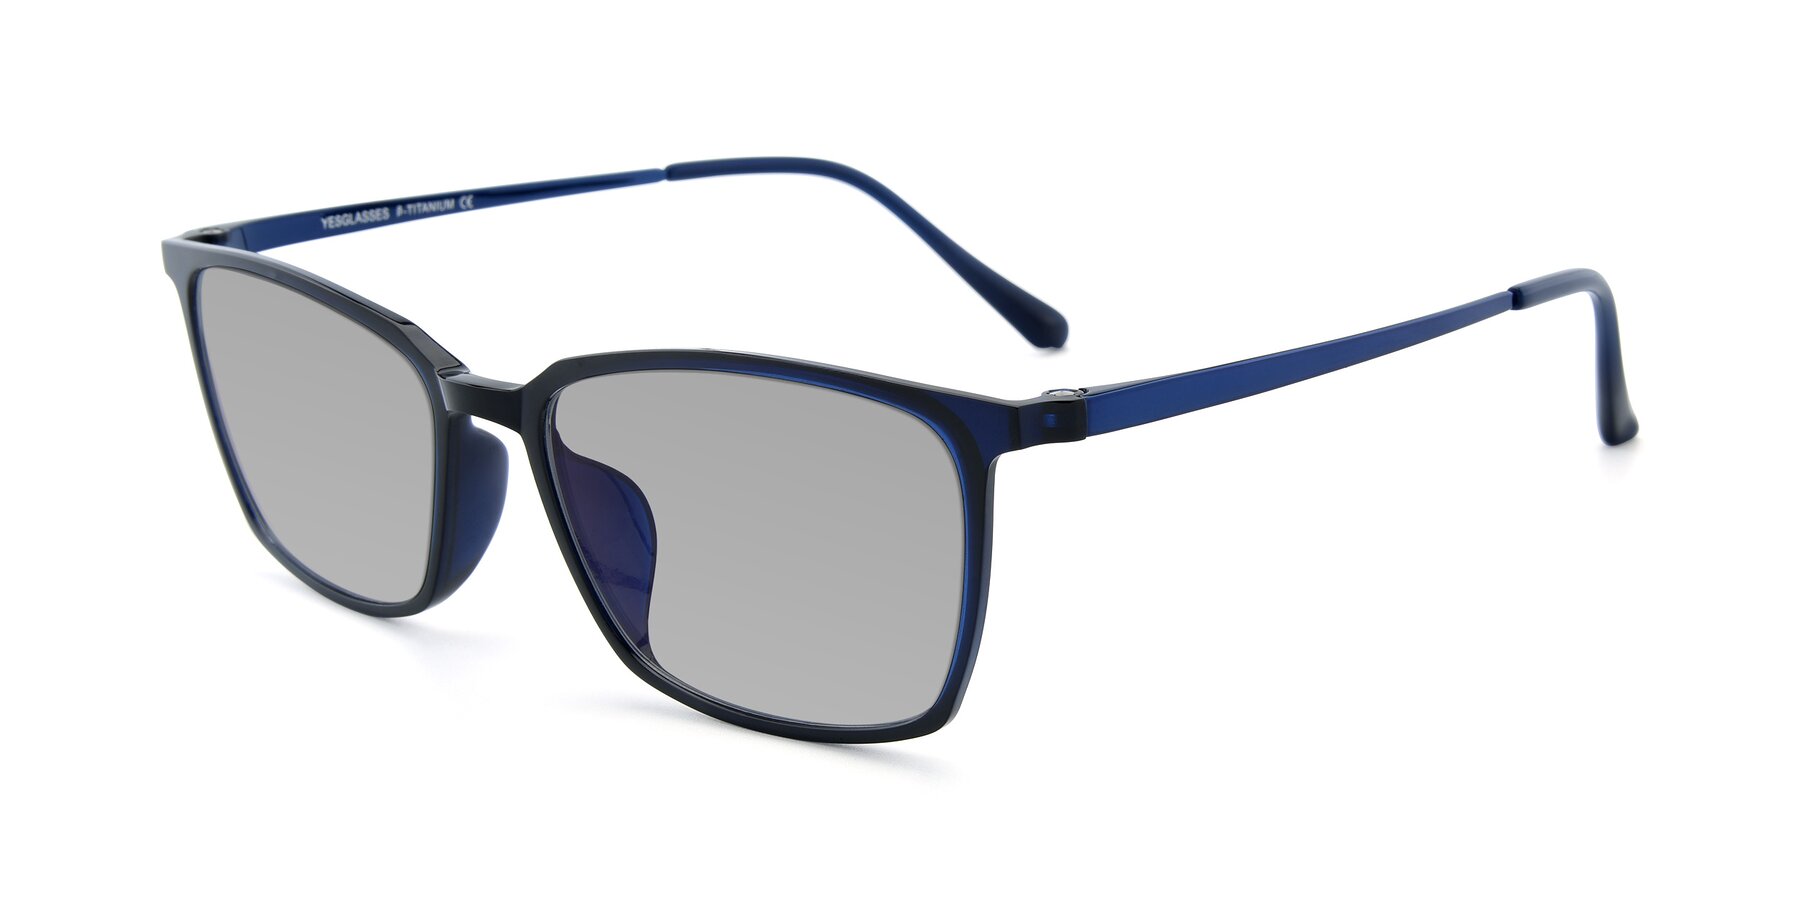 Angle of XC-5009 in Blue with Light Gray Tinted Lenses